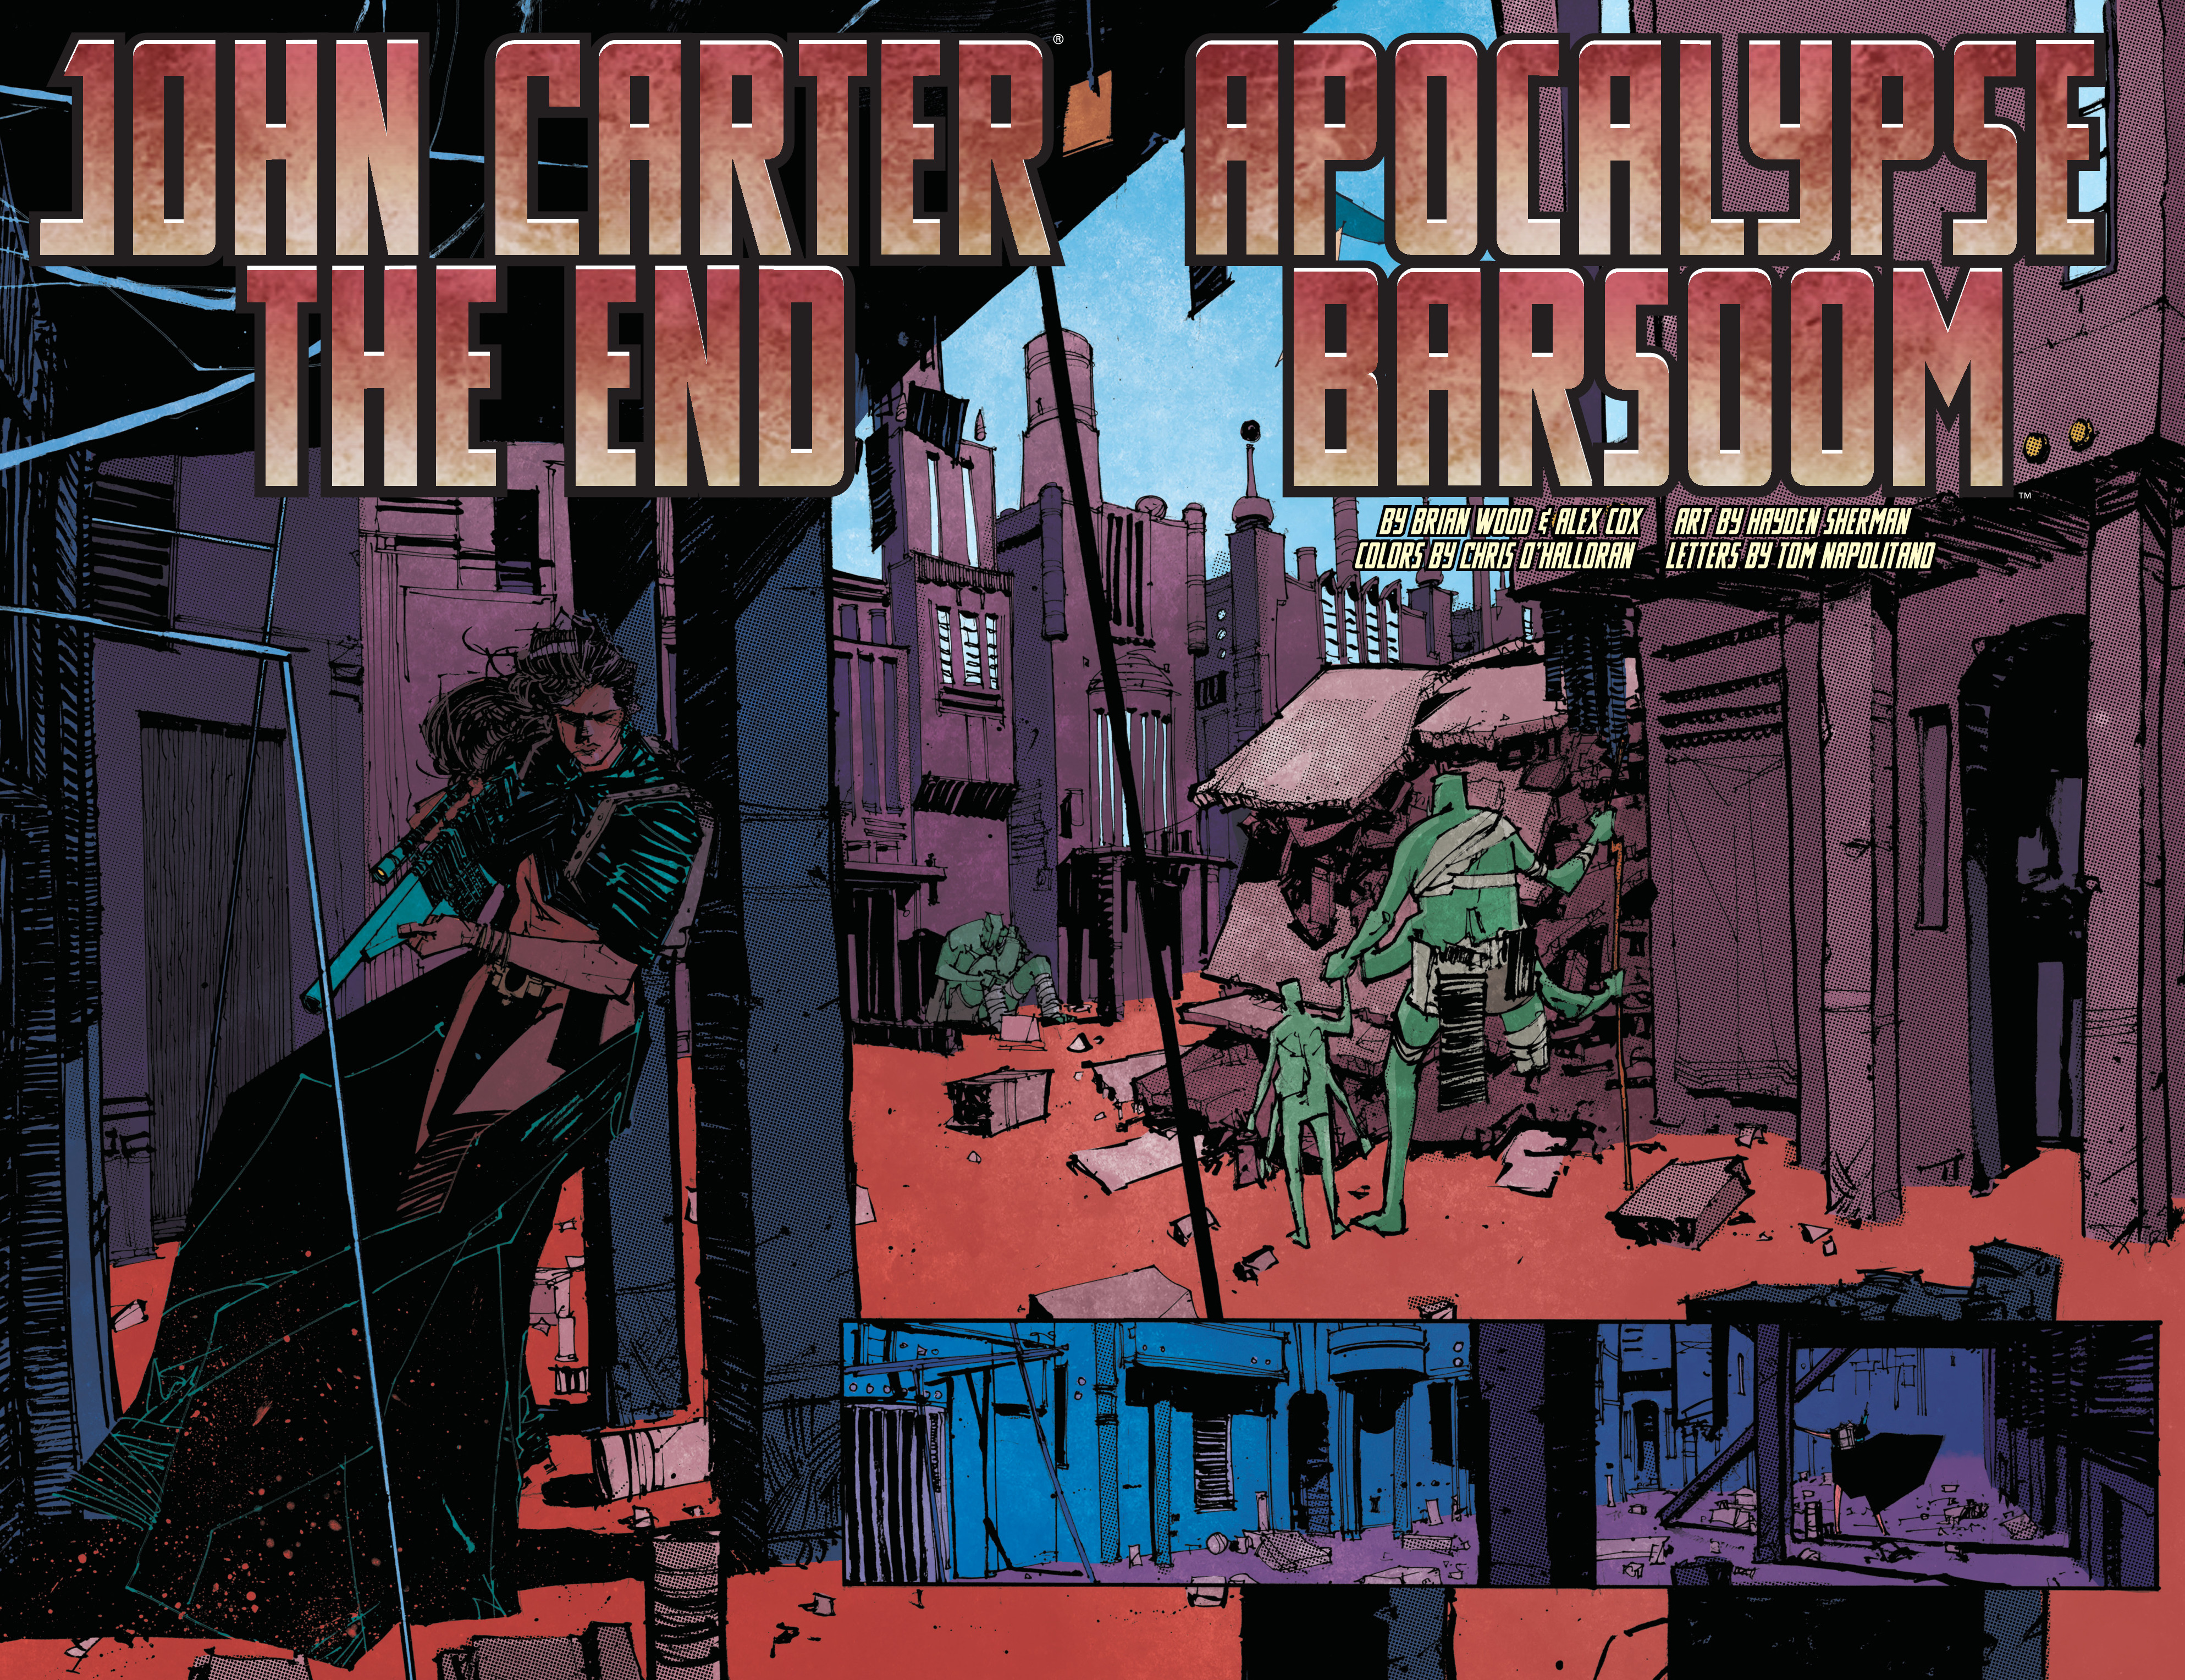 Read online John Carter: The End comic -  Issue #2 - 5